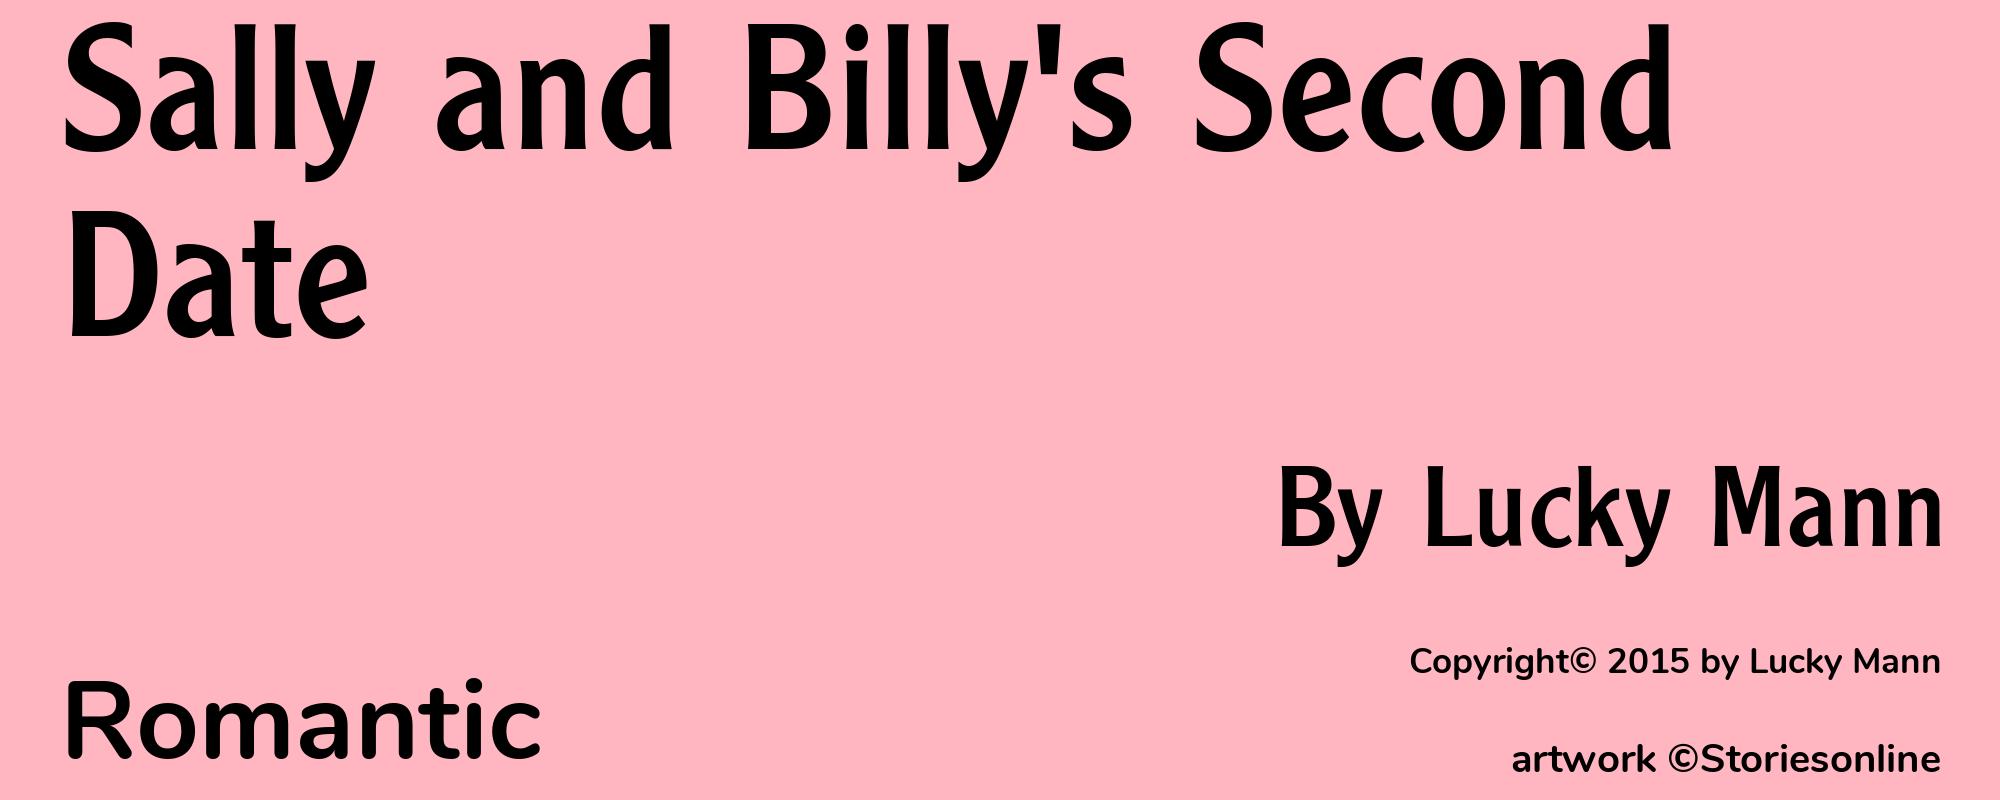 Sally and Billy's Second Date - Cover